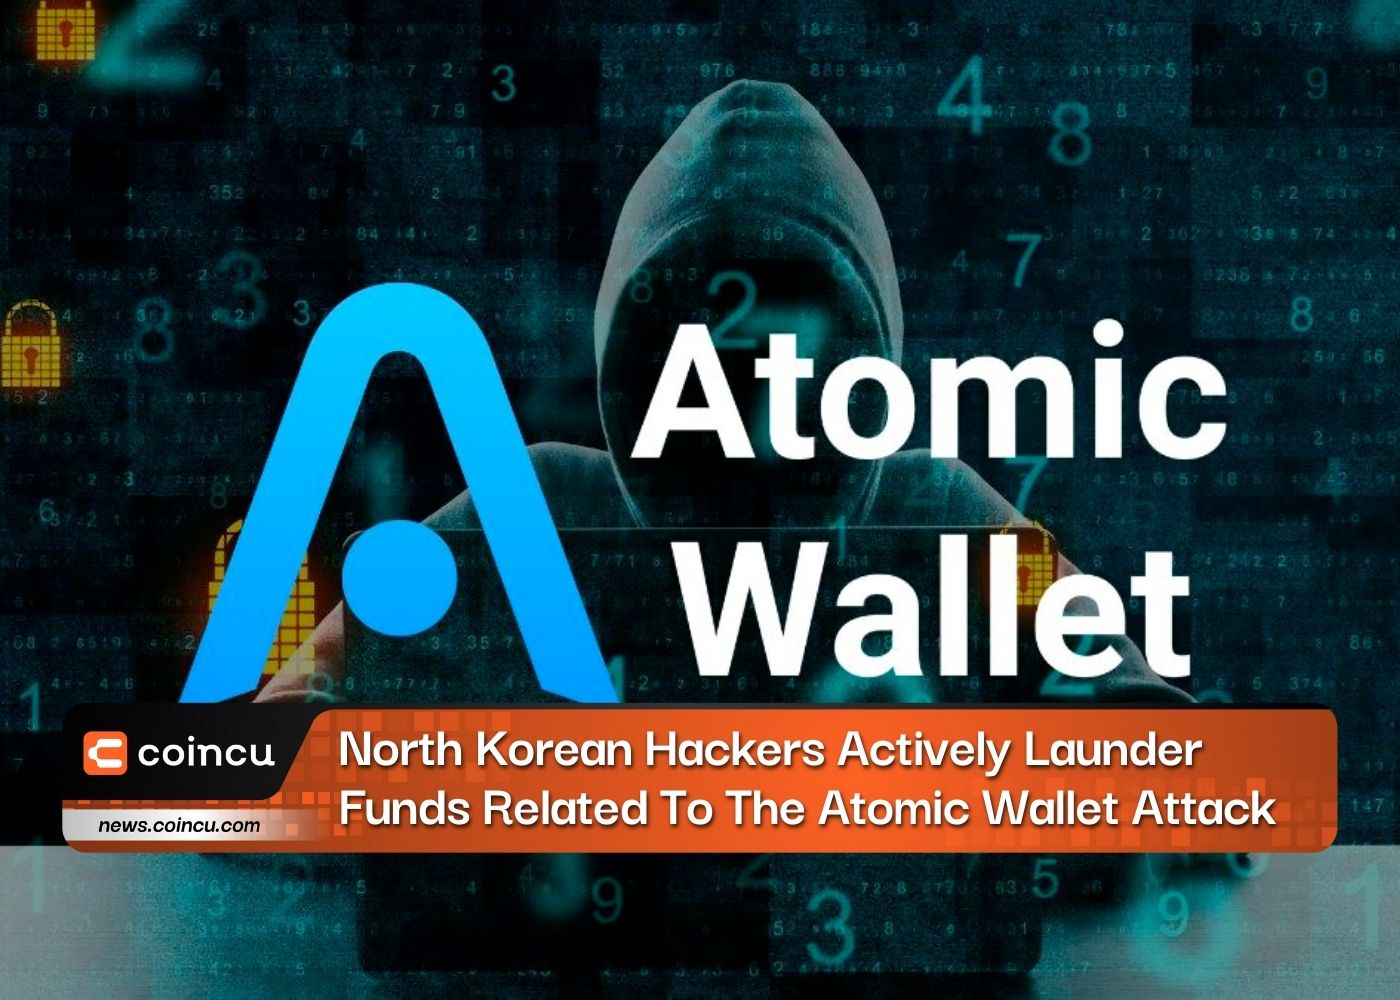 North Korean Hackers Actively Launder Funds Related To The Atomic Wallet Attack